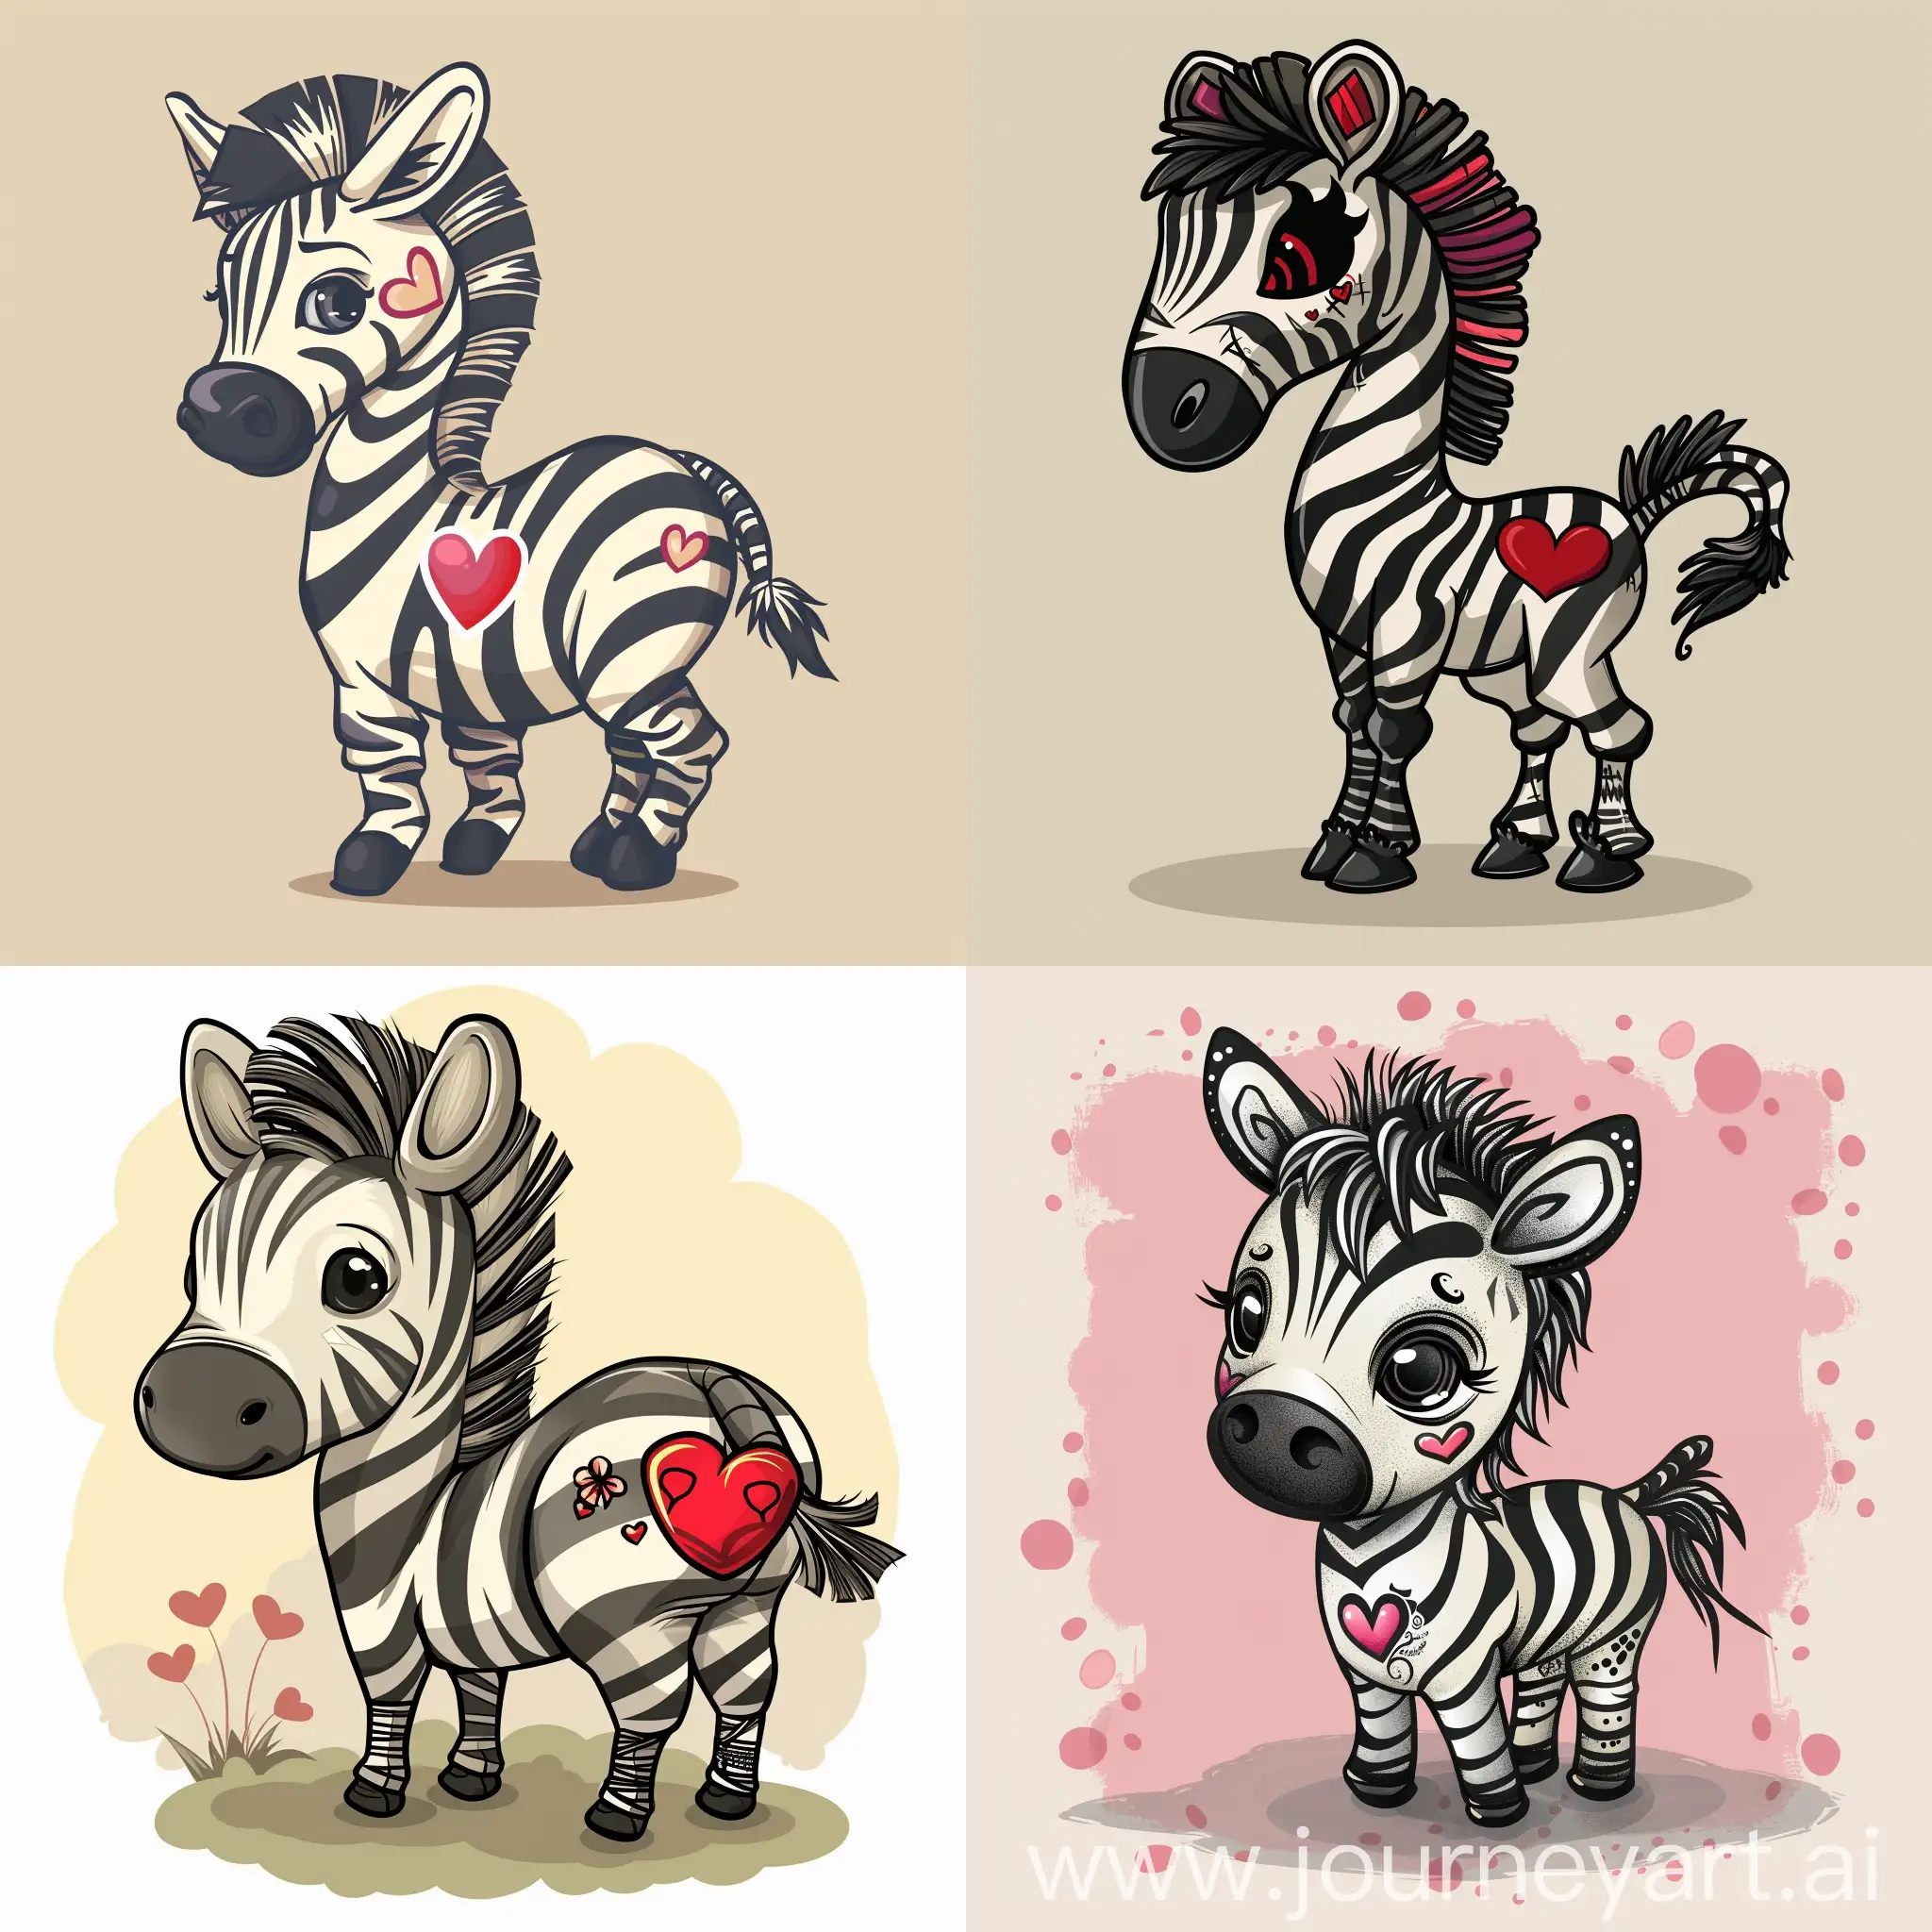 Funky-Zebra-Cartoon-with-Heart-Tattoo-Vibrant-and-Playful-Illustration